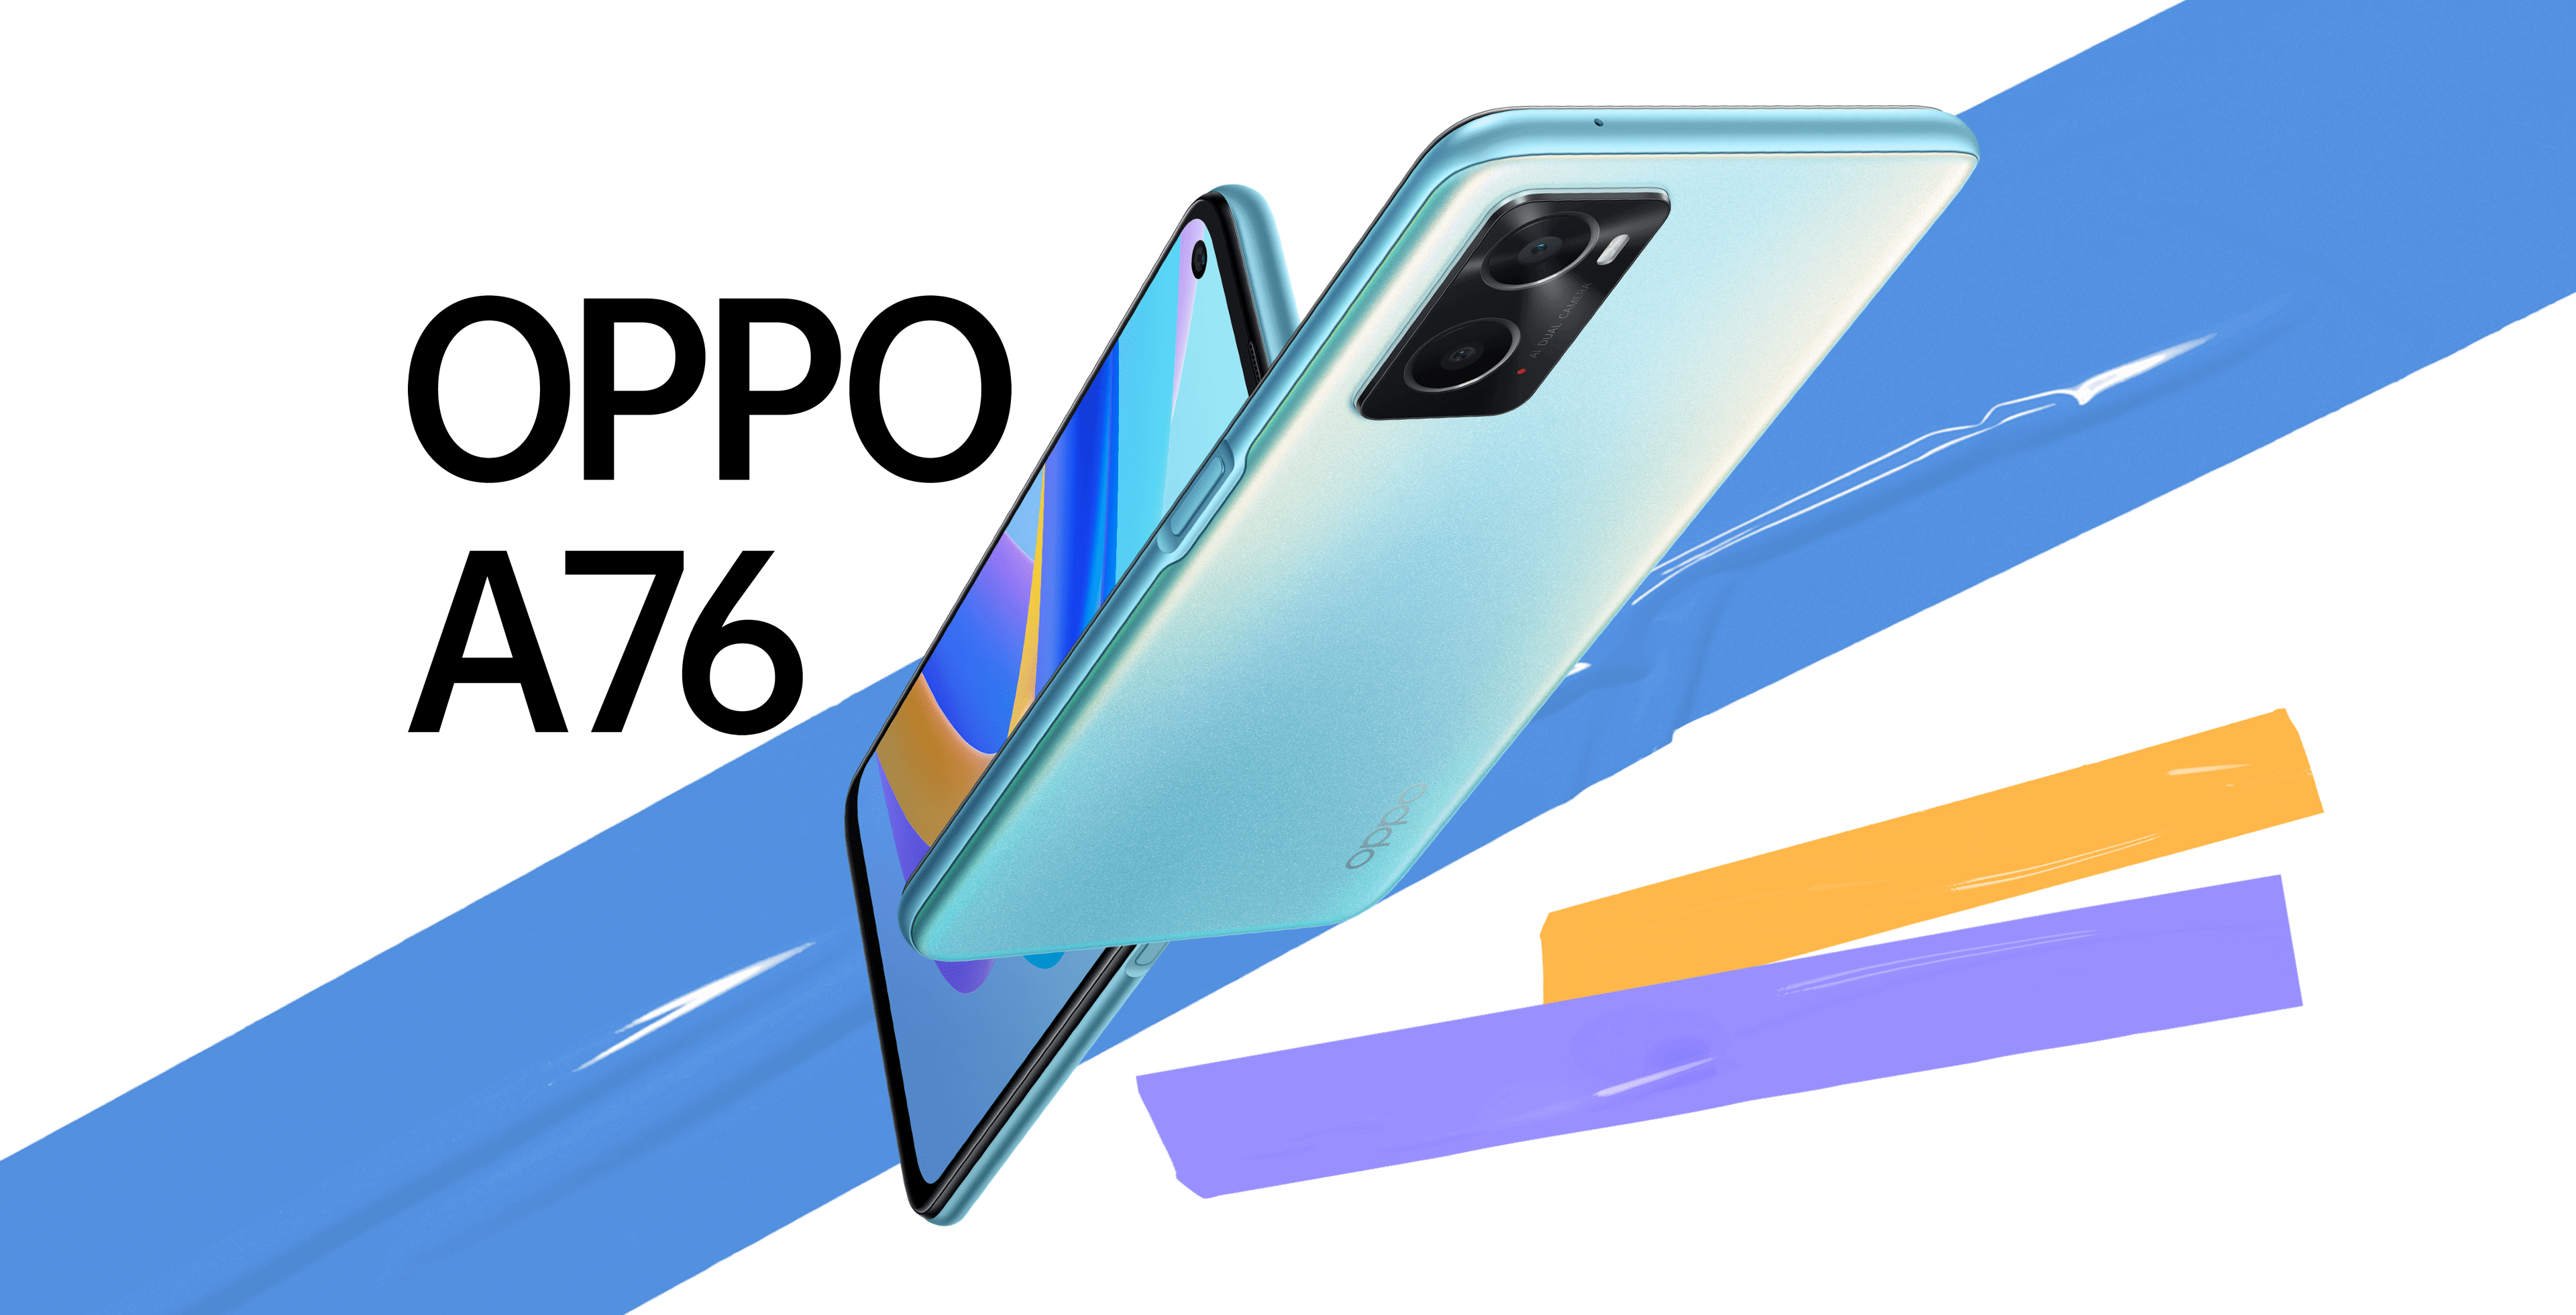 oppo a76 | oppo a76 price in uae | a76 oppo